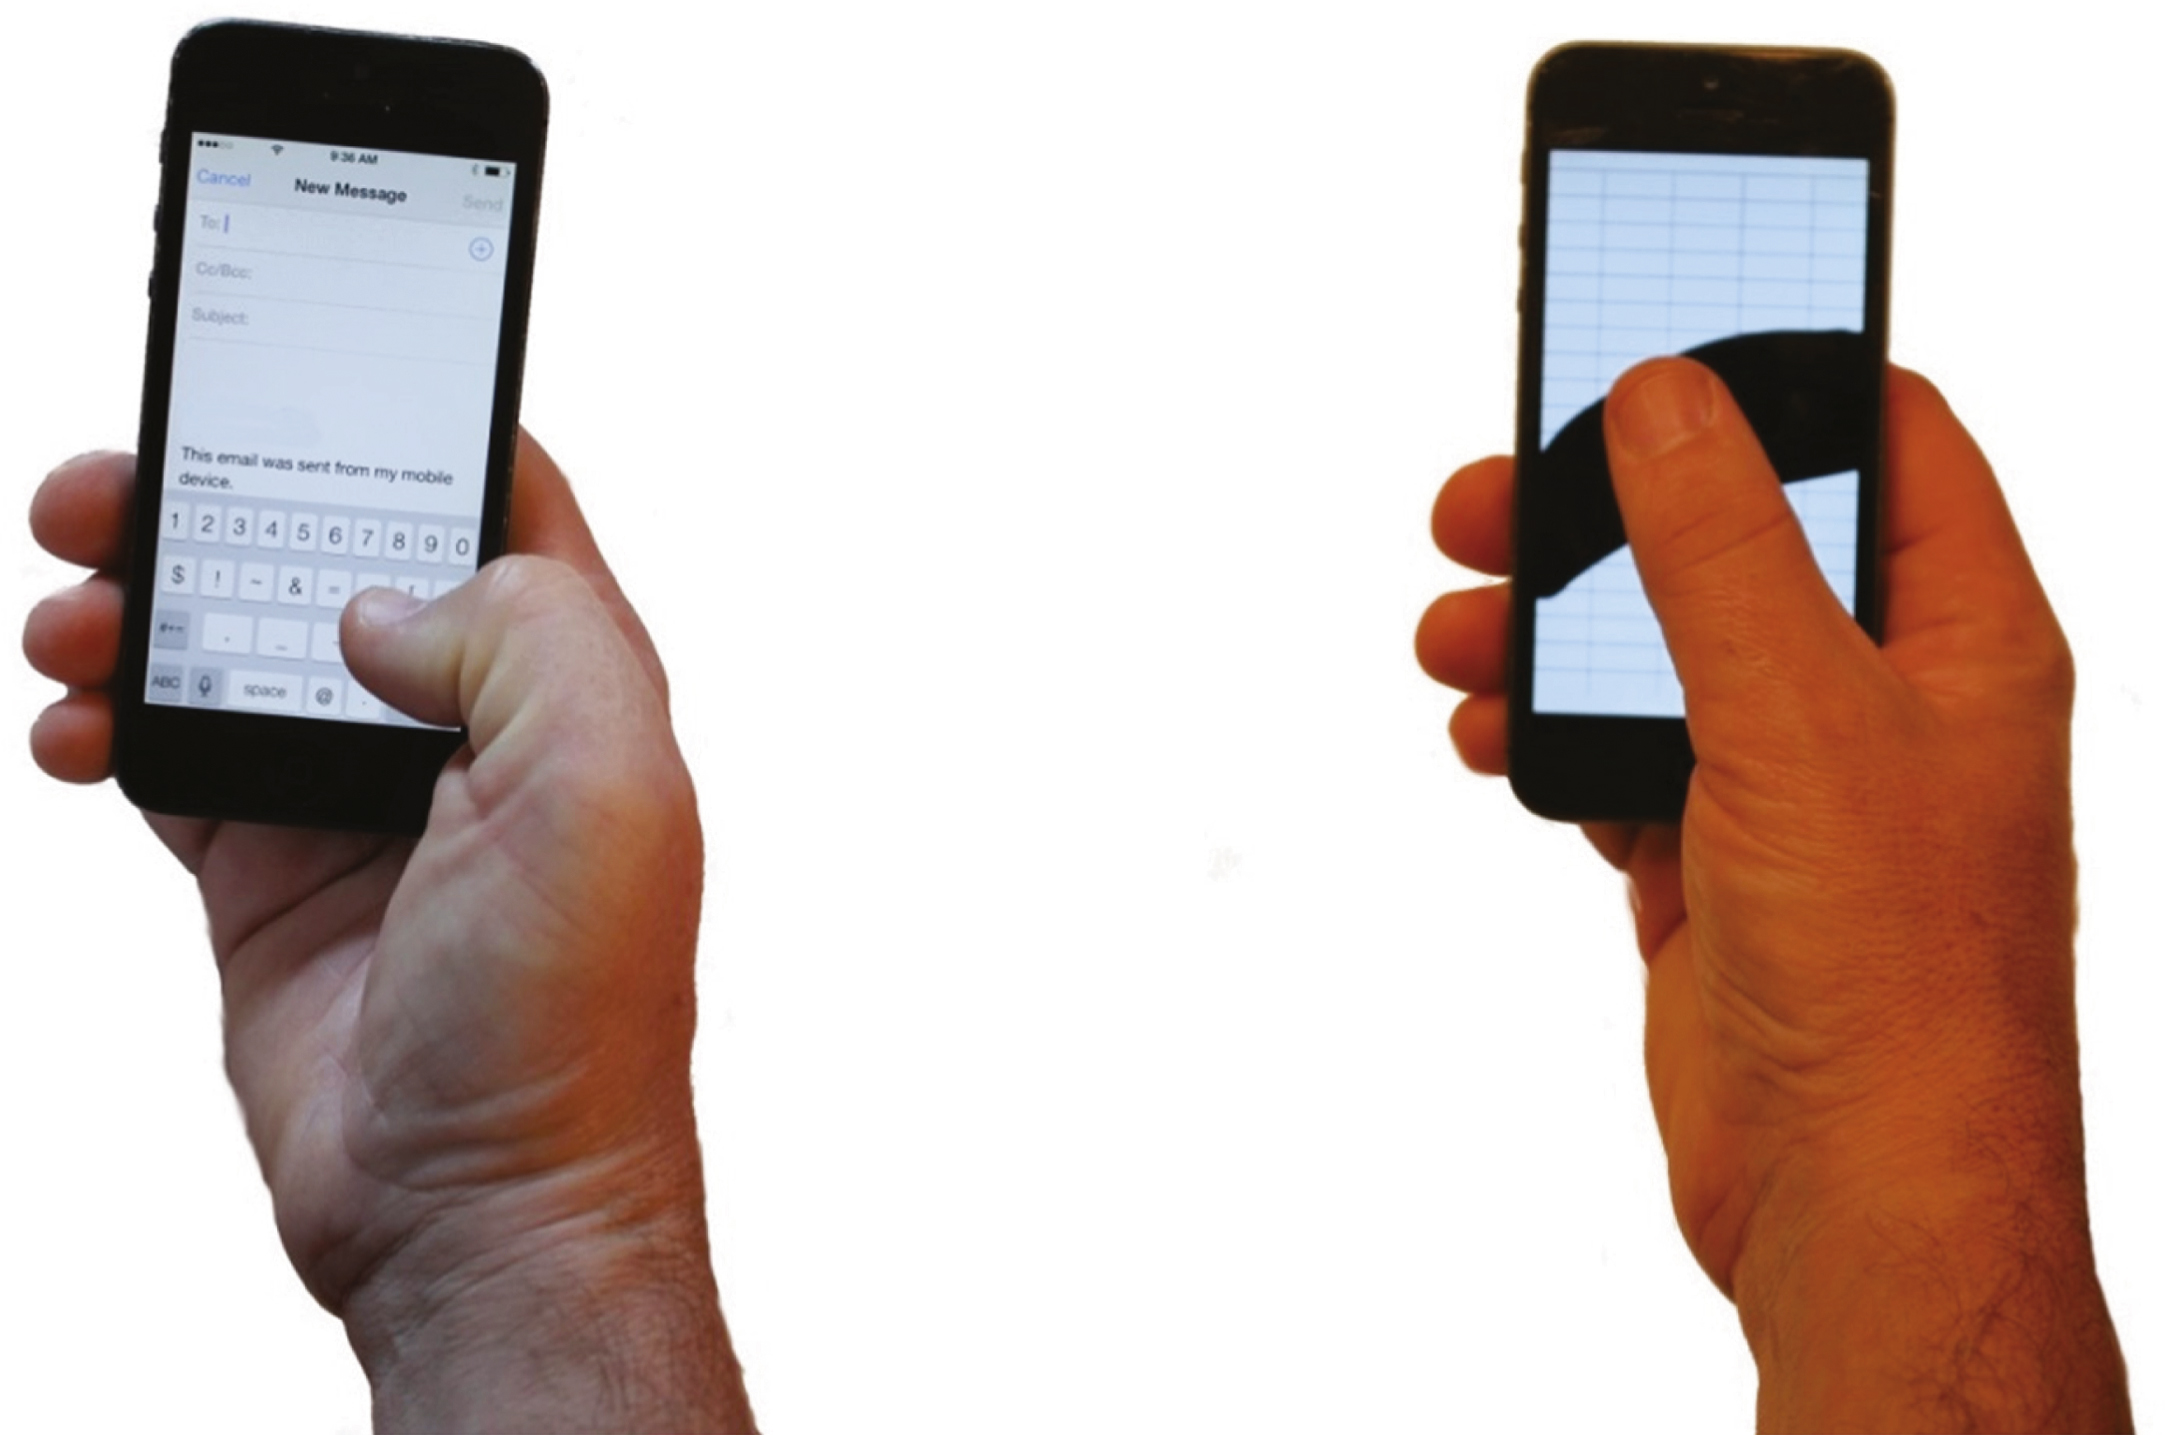 When icons and buttons are located near the base of the thumb the thumb takes on a non-neutral posture (left photo) whereas when icons and buttons are placed along an arc as noted by the black area in the figure on the right the thumb posture takes on a more neutral posture. The phone on the right is displaying an image of the optimal area for thumb reach as described by Otten et al. [46]